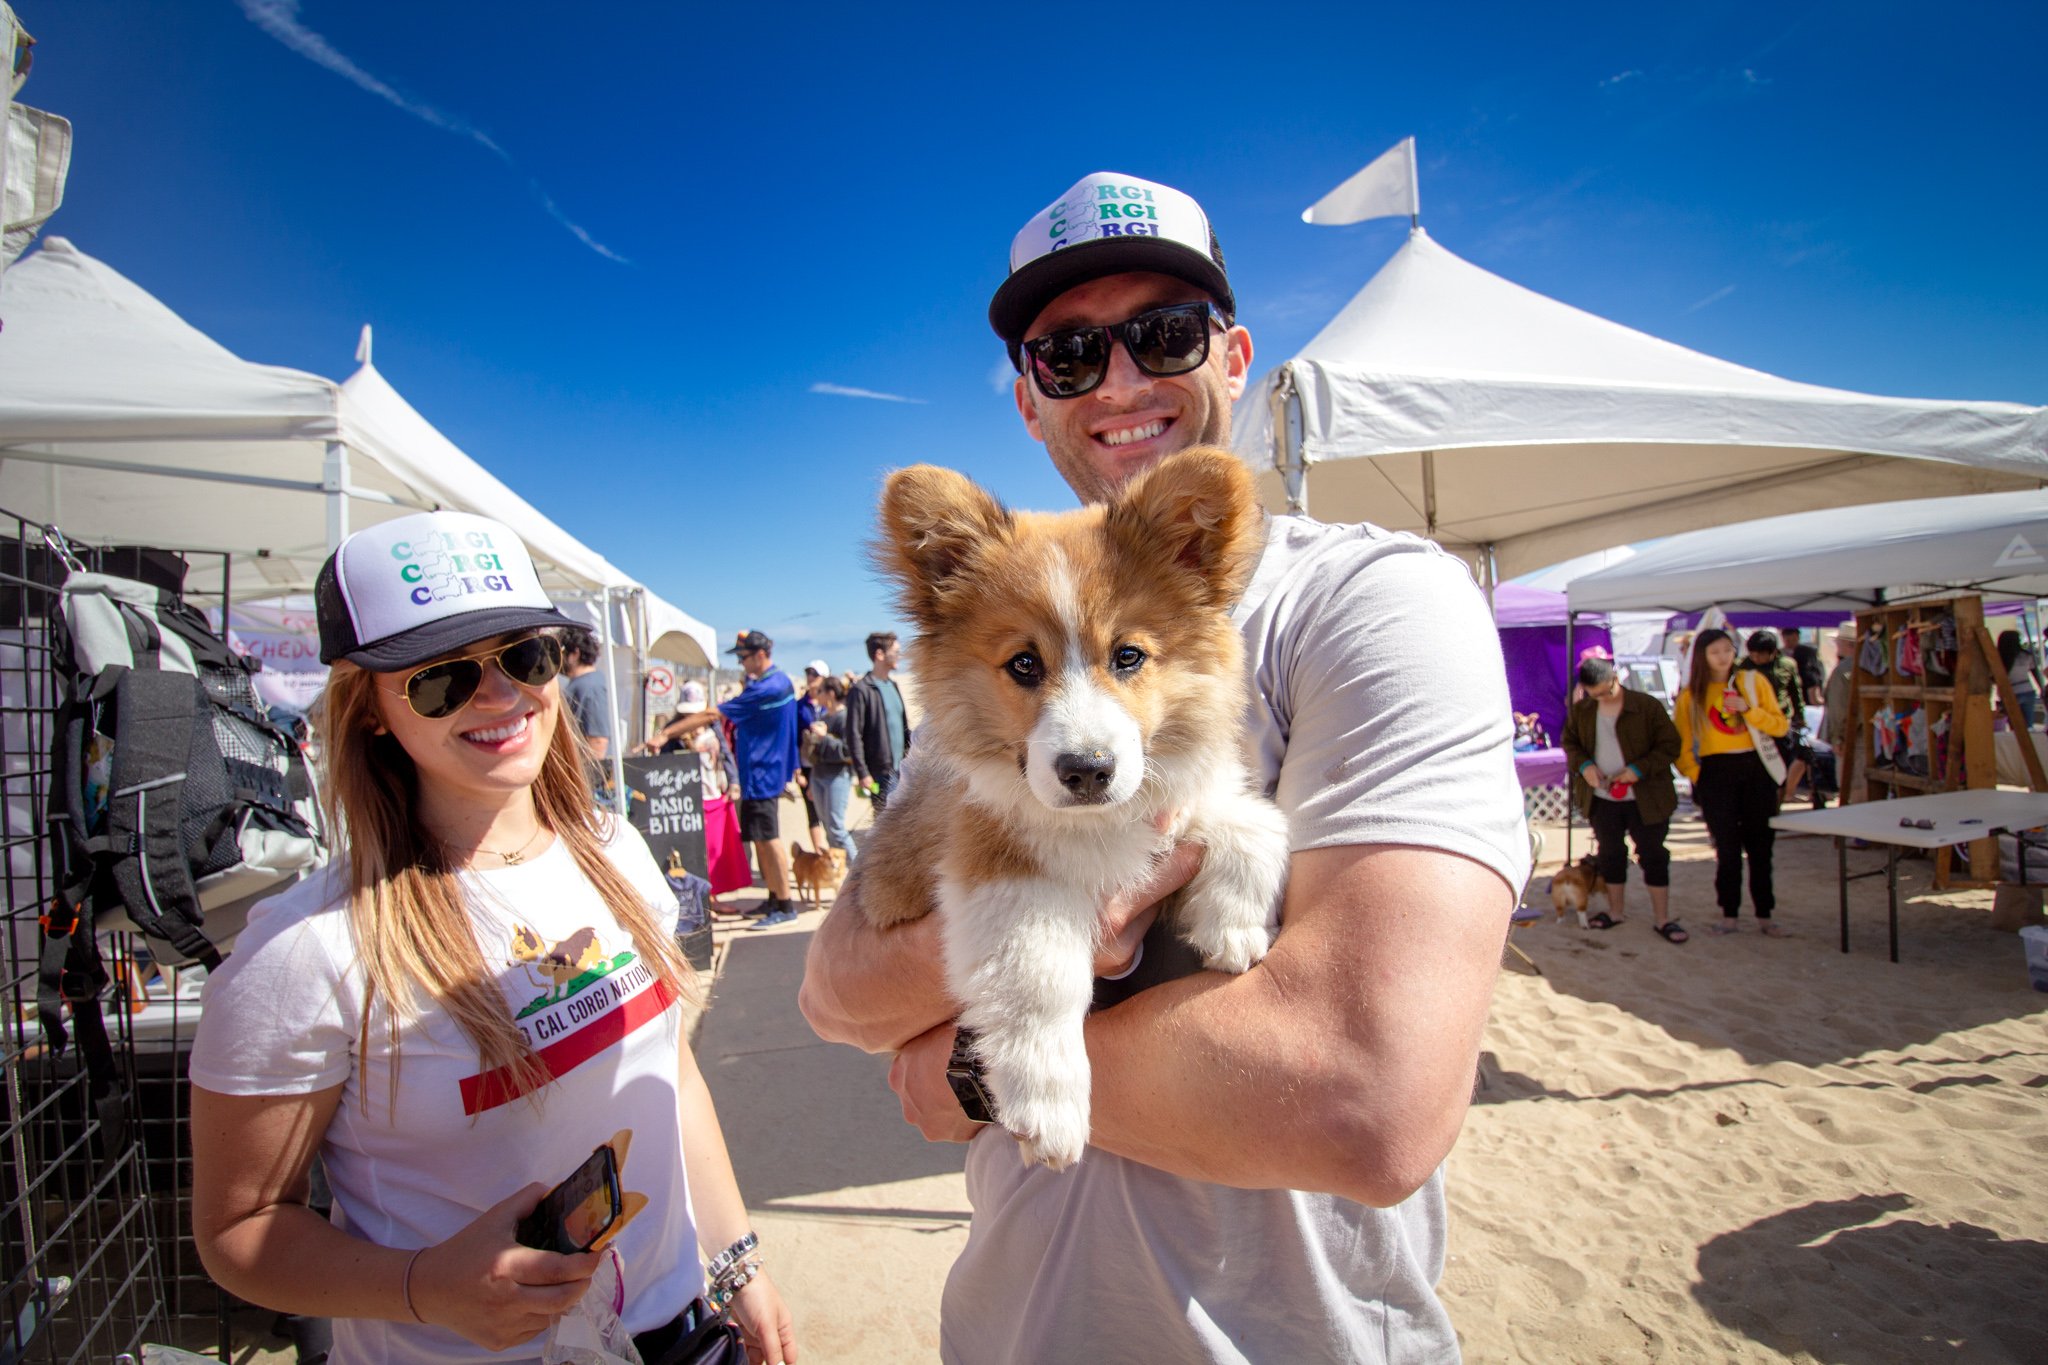 Orange County Pet and Dog Photography - by Steamer Lee - Corgi Beach Day Spring 2019 - Southern Caliornia 67 (2).JPG